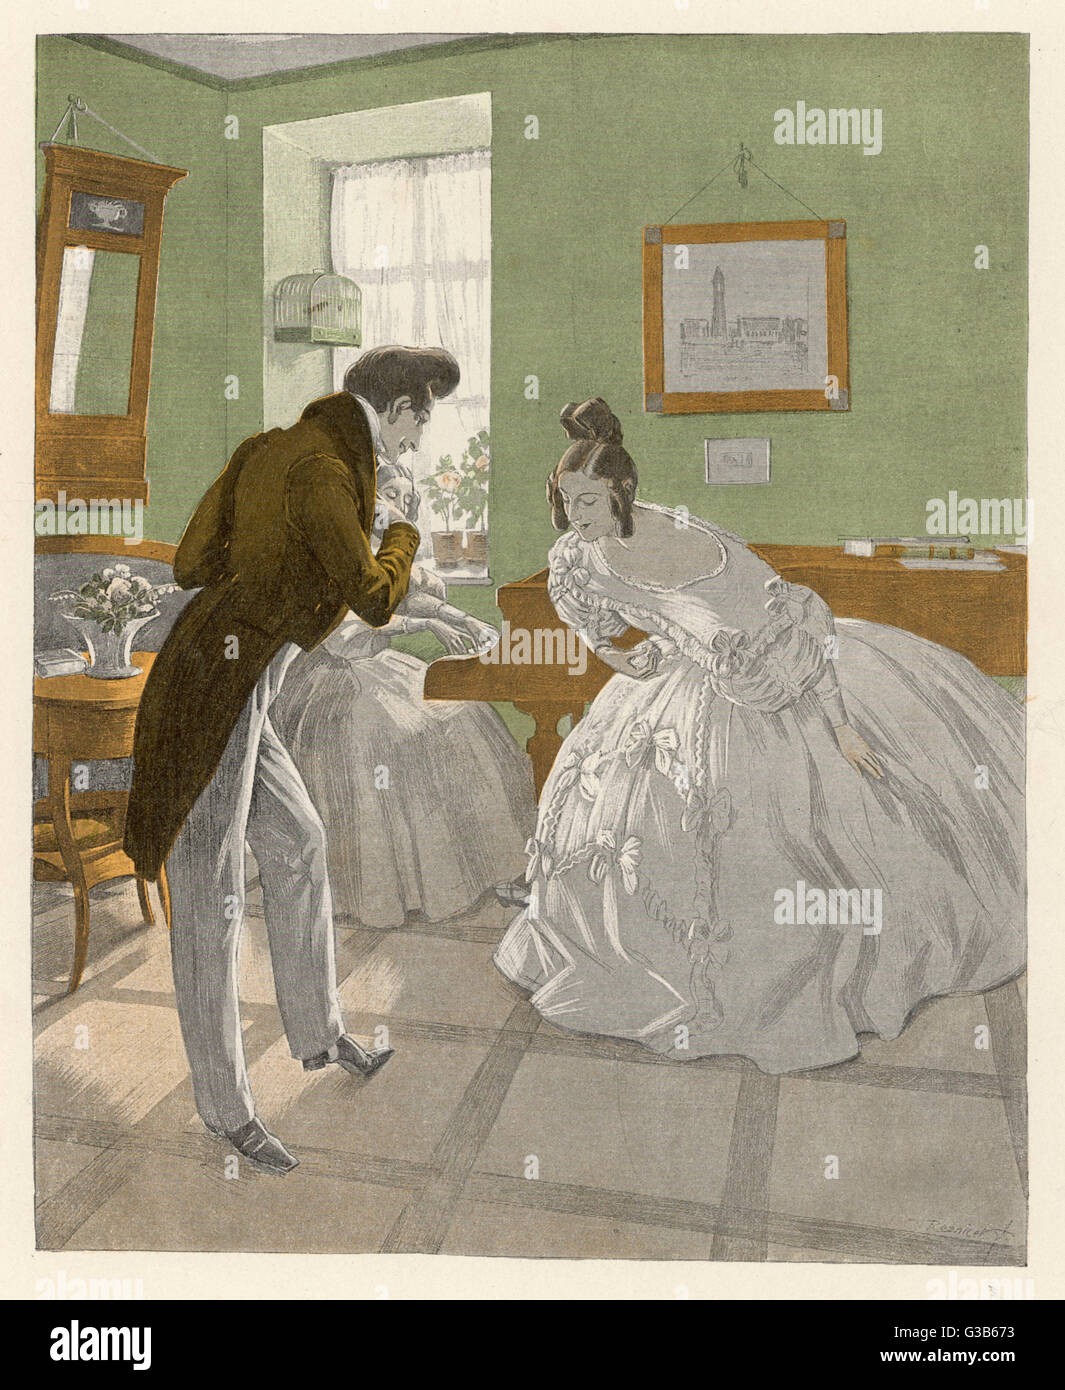 A gentleman of the romantic  era invites a lady to dance :  she accepts his invitation  with a graceful bow.       Date: circa 1840 Stock Photo